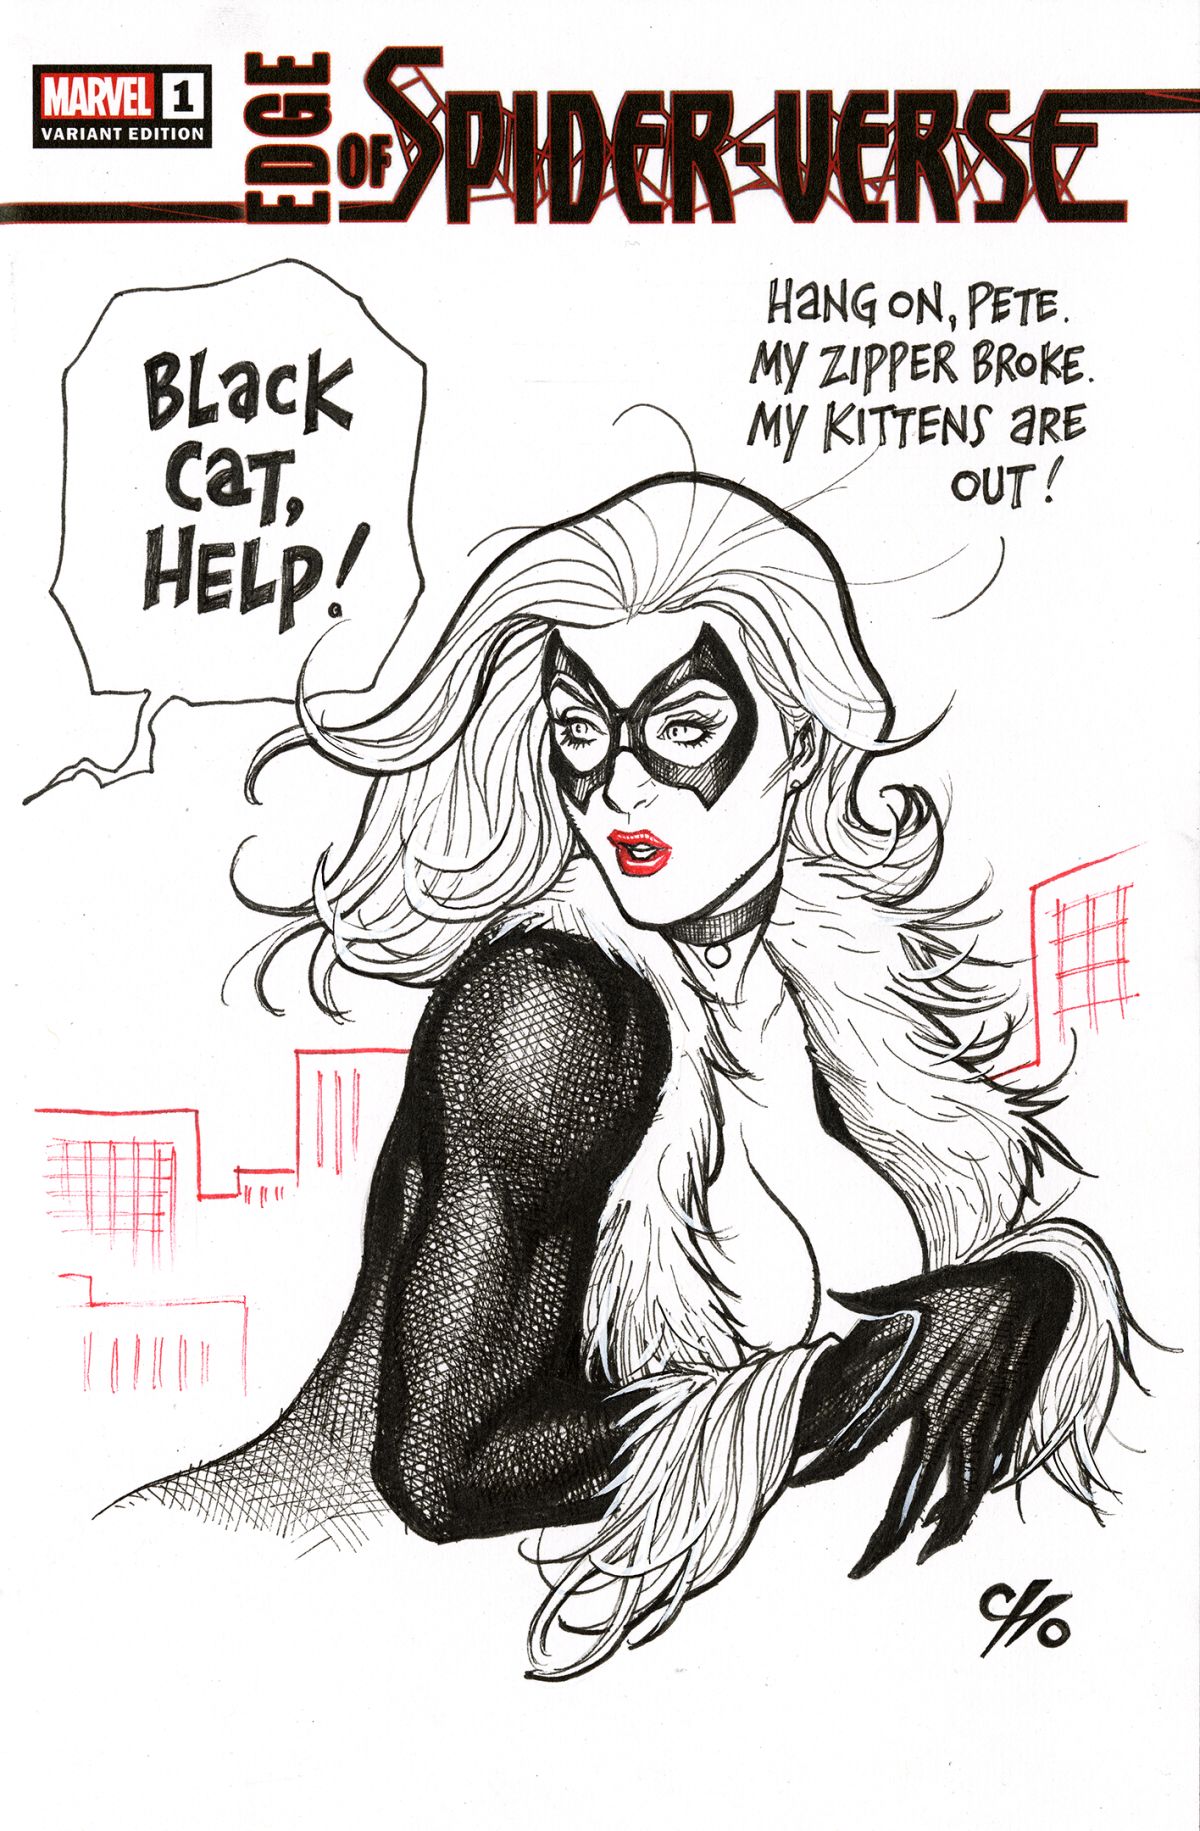 Black Cat sketch cover by Frank Cho Auction | Nerd Crawler